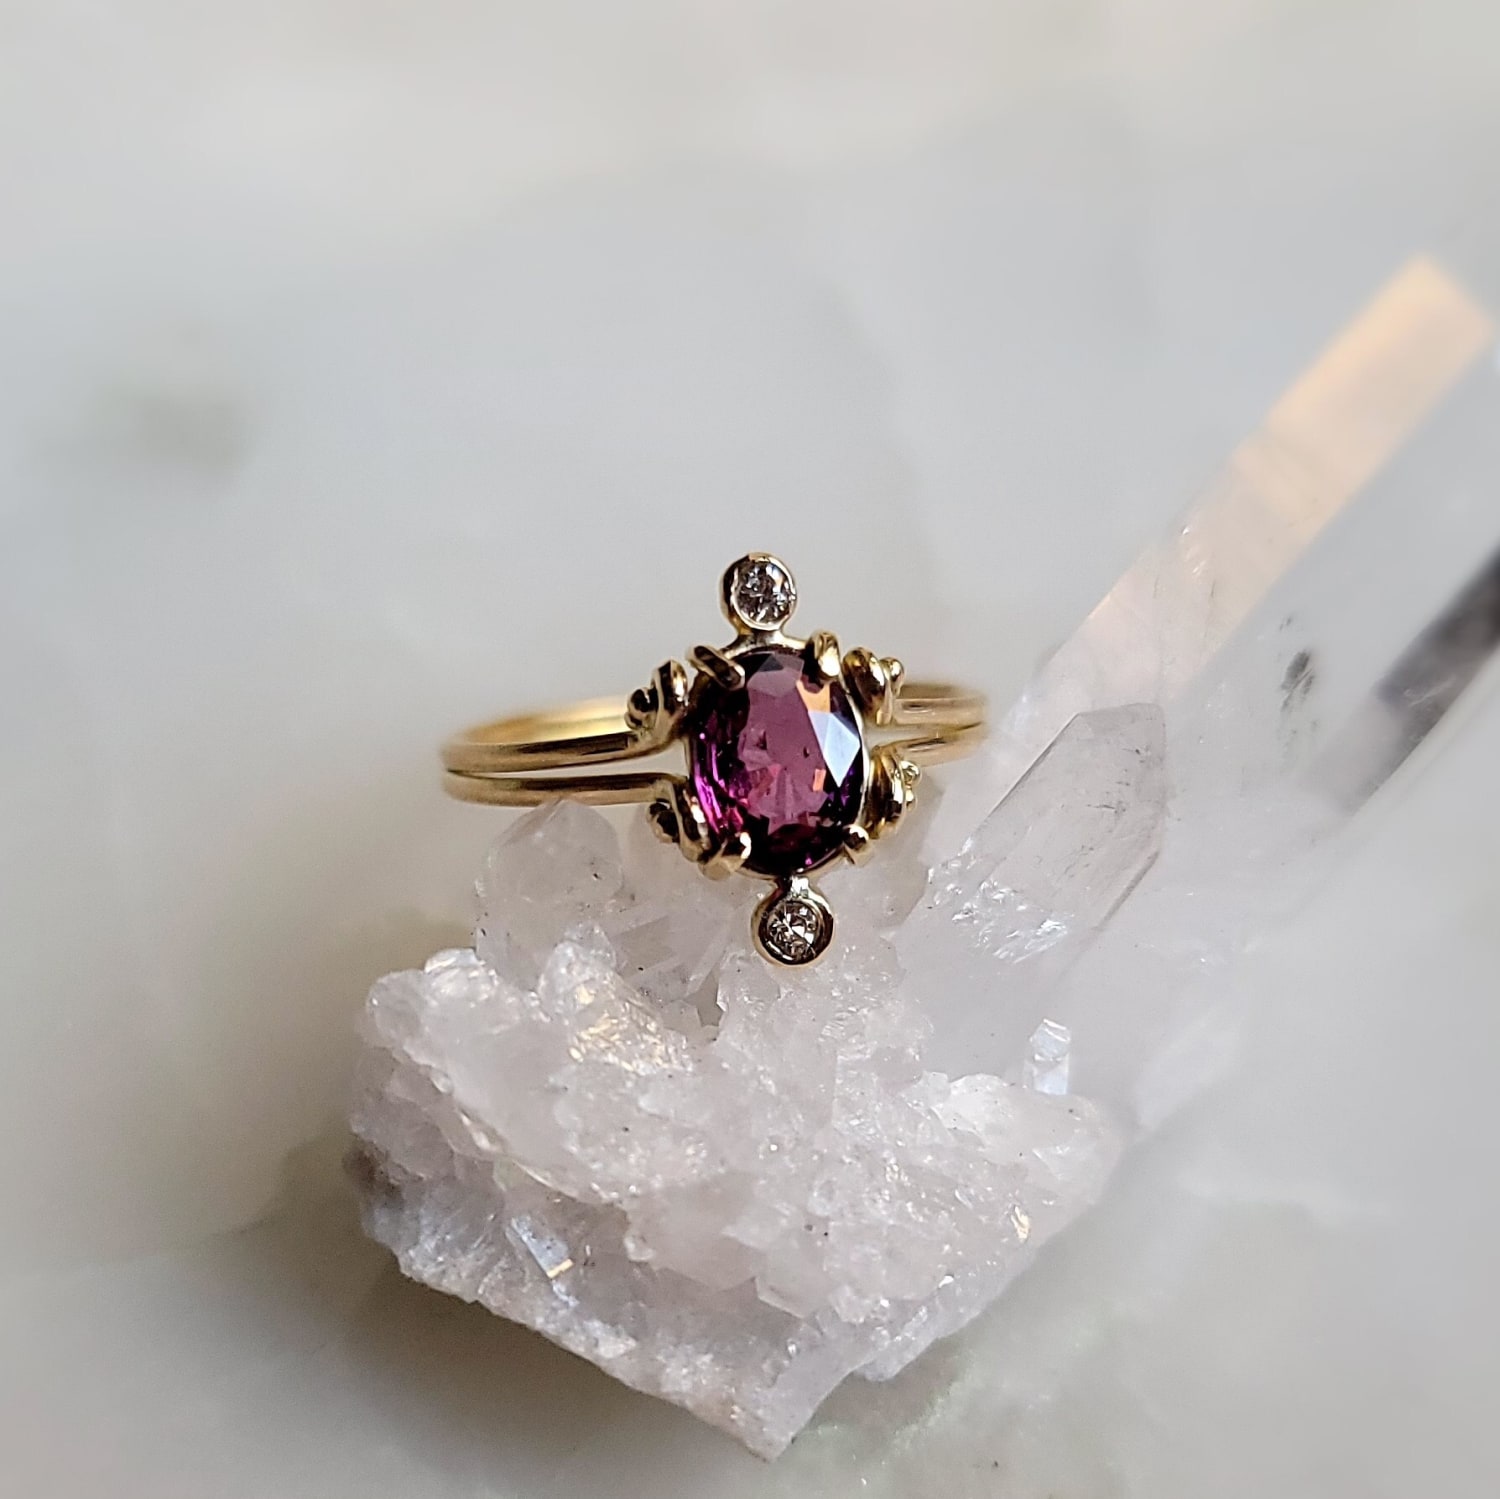 A few months ago, I posted my Circe and Demeter rings. The response I got from this wonderful sub encouraged me to start a whole collection of goddesses. This is the first finished piece in the new collection- Thetis, a color-change garnet befitting of a shape-shifting goddess.